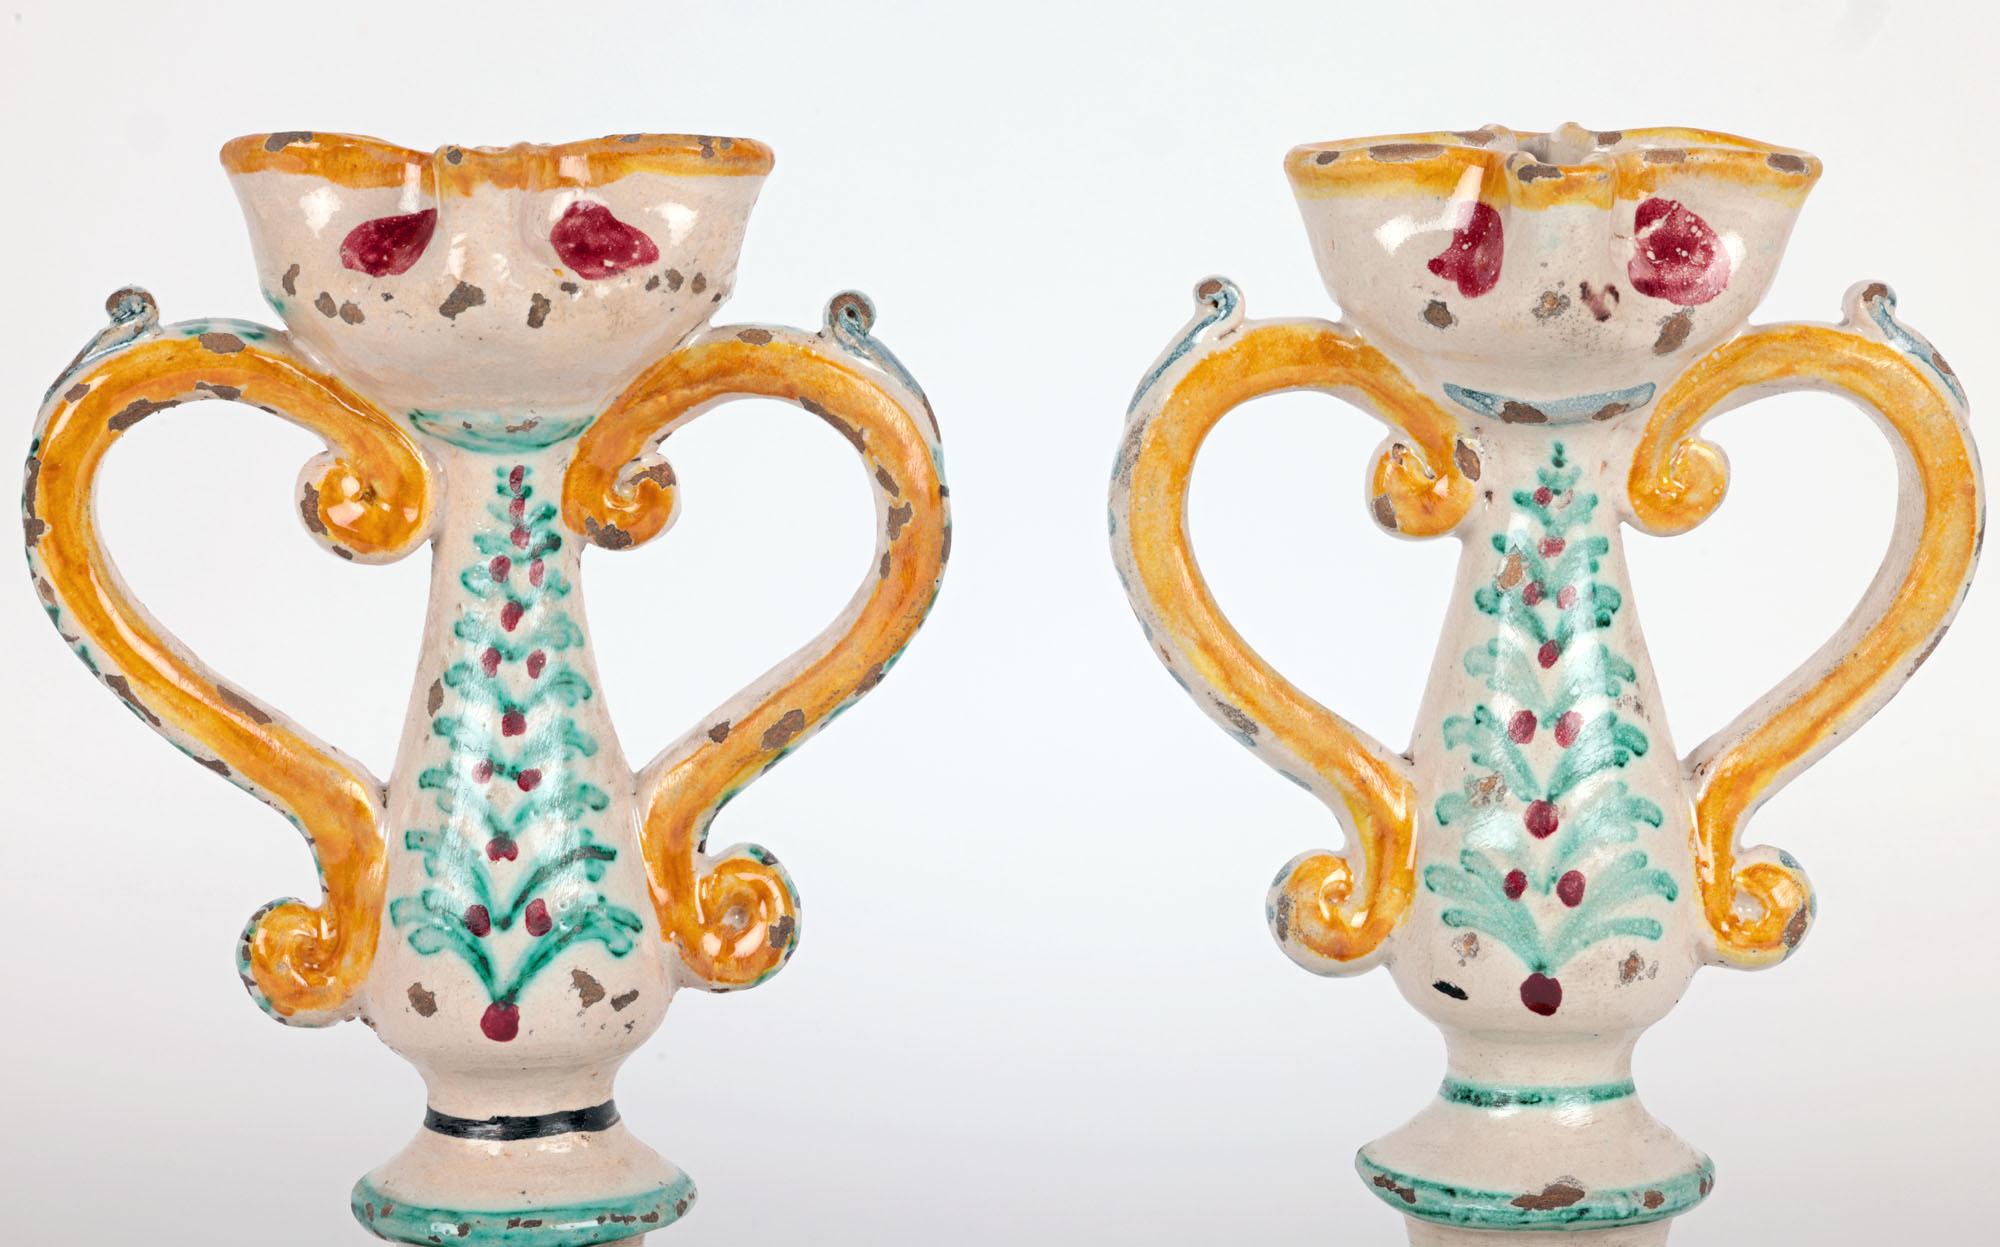 A stylish pair antique South Italian Sicilian maiolica pottery twin handled candlesticks dating from the 18th century. The handmade earthenware candlesticks stand on a wide bowl-shaped foot with a flat partially glazed base with upright sides. The